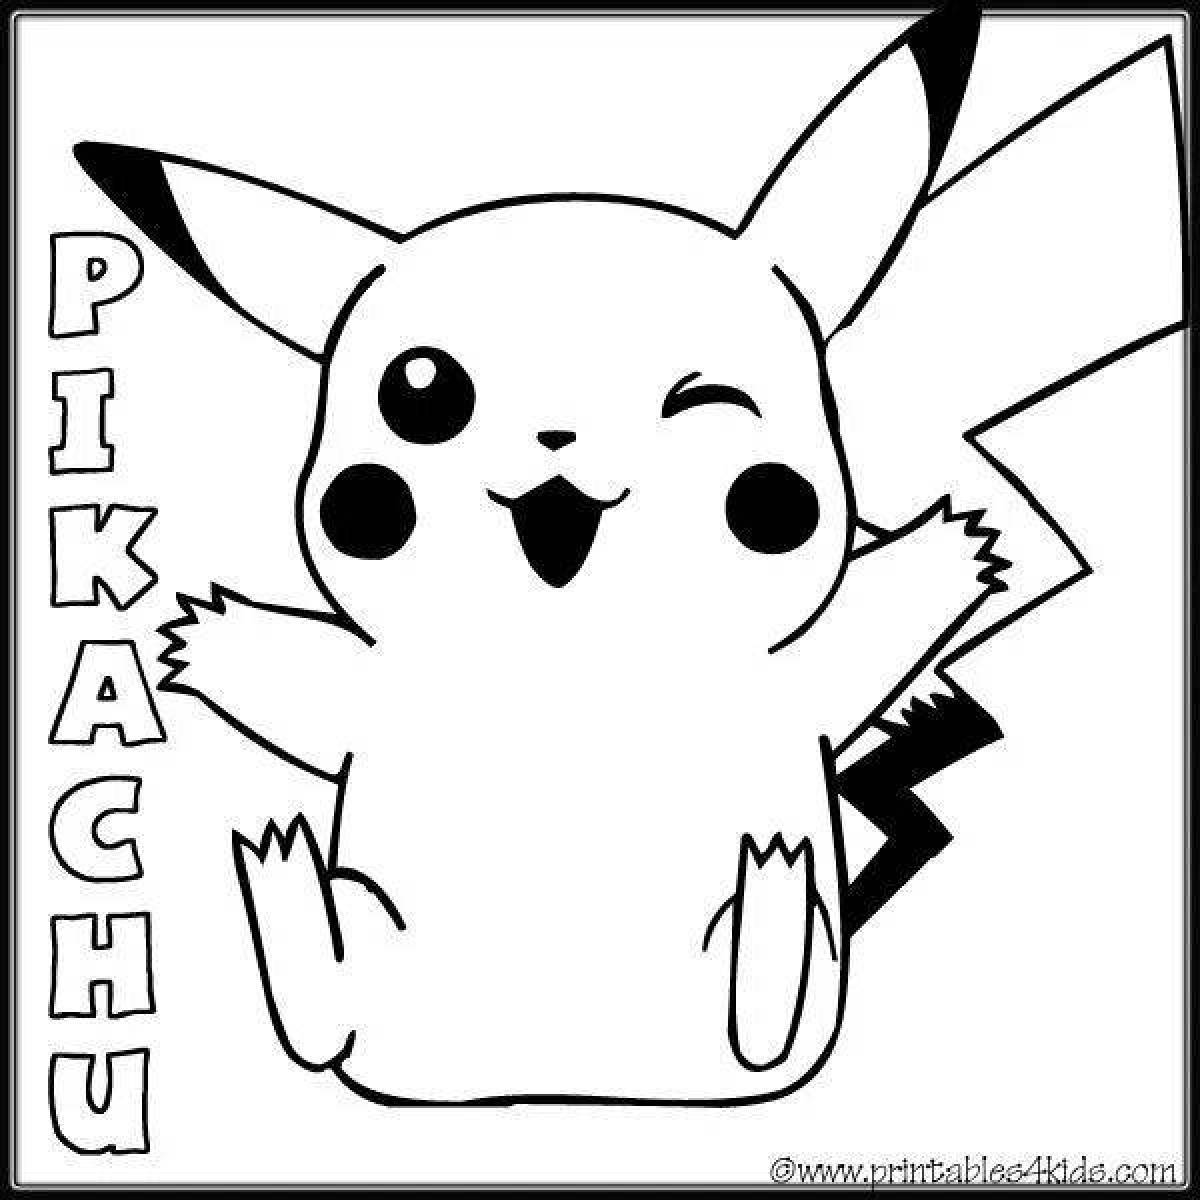 Colouring funny pikachu